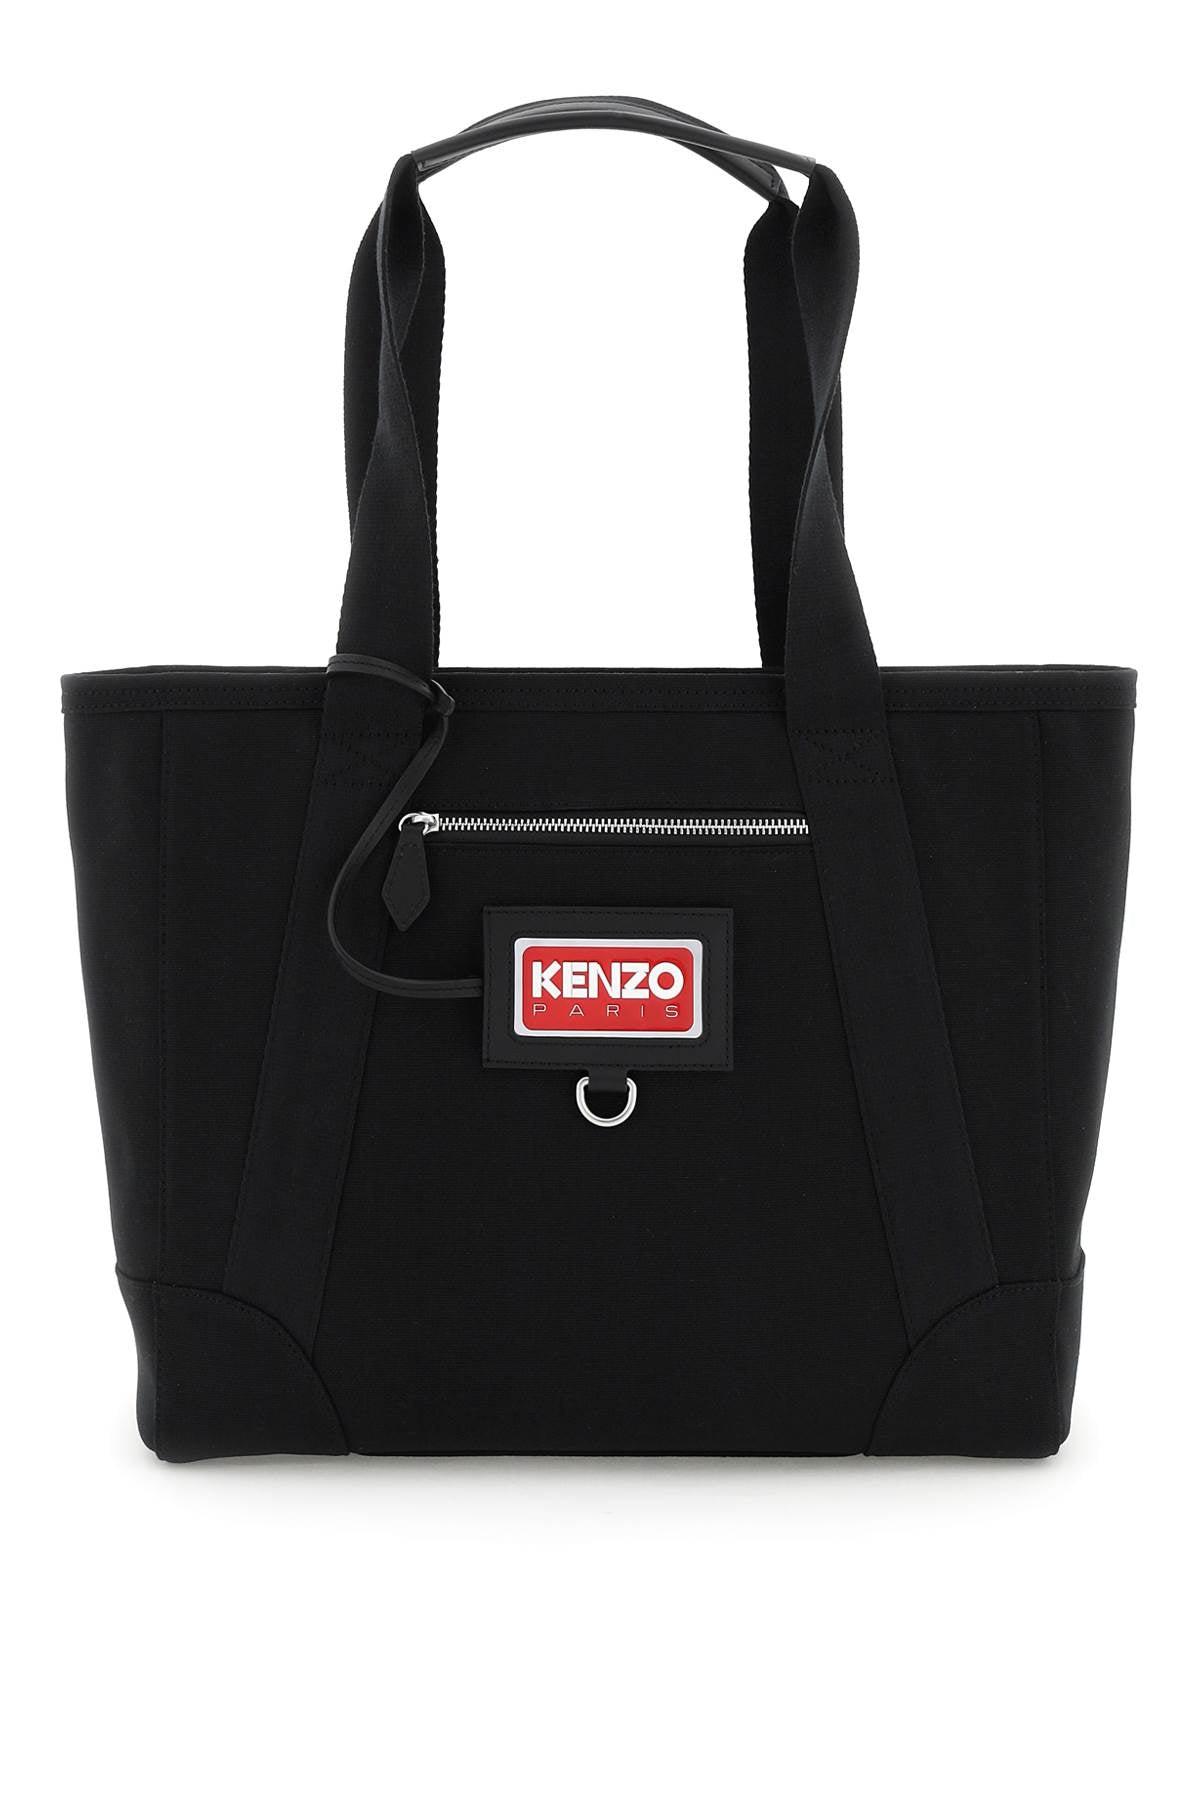 KENZO Big Fabric Tote Bag With Shoulder Strap in Black | Lyst